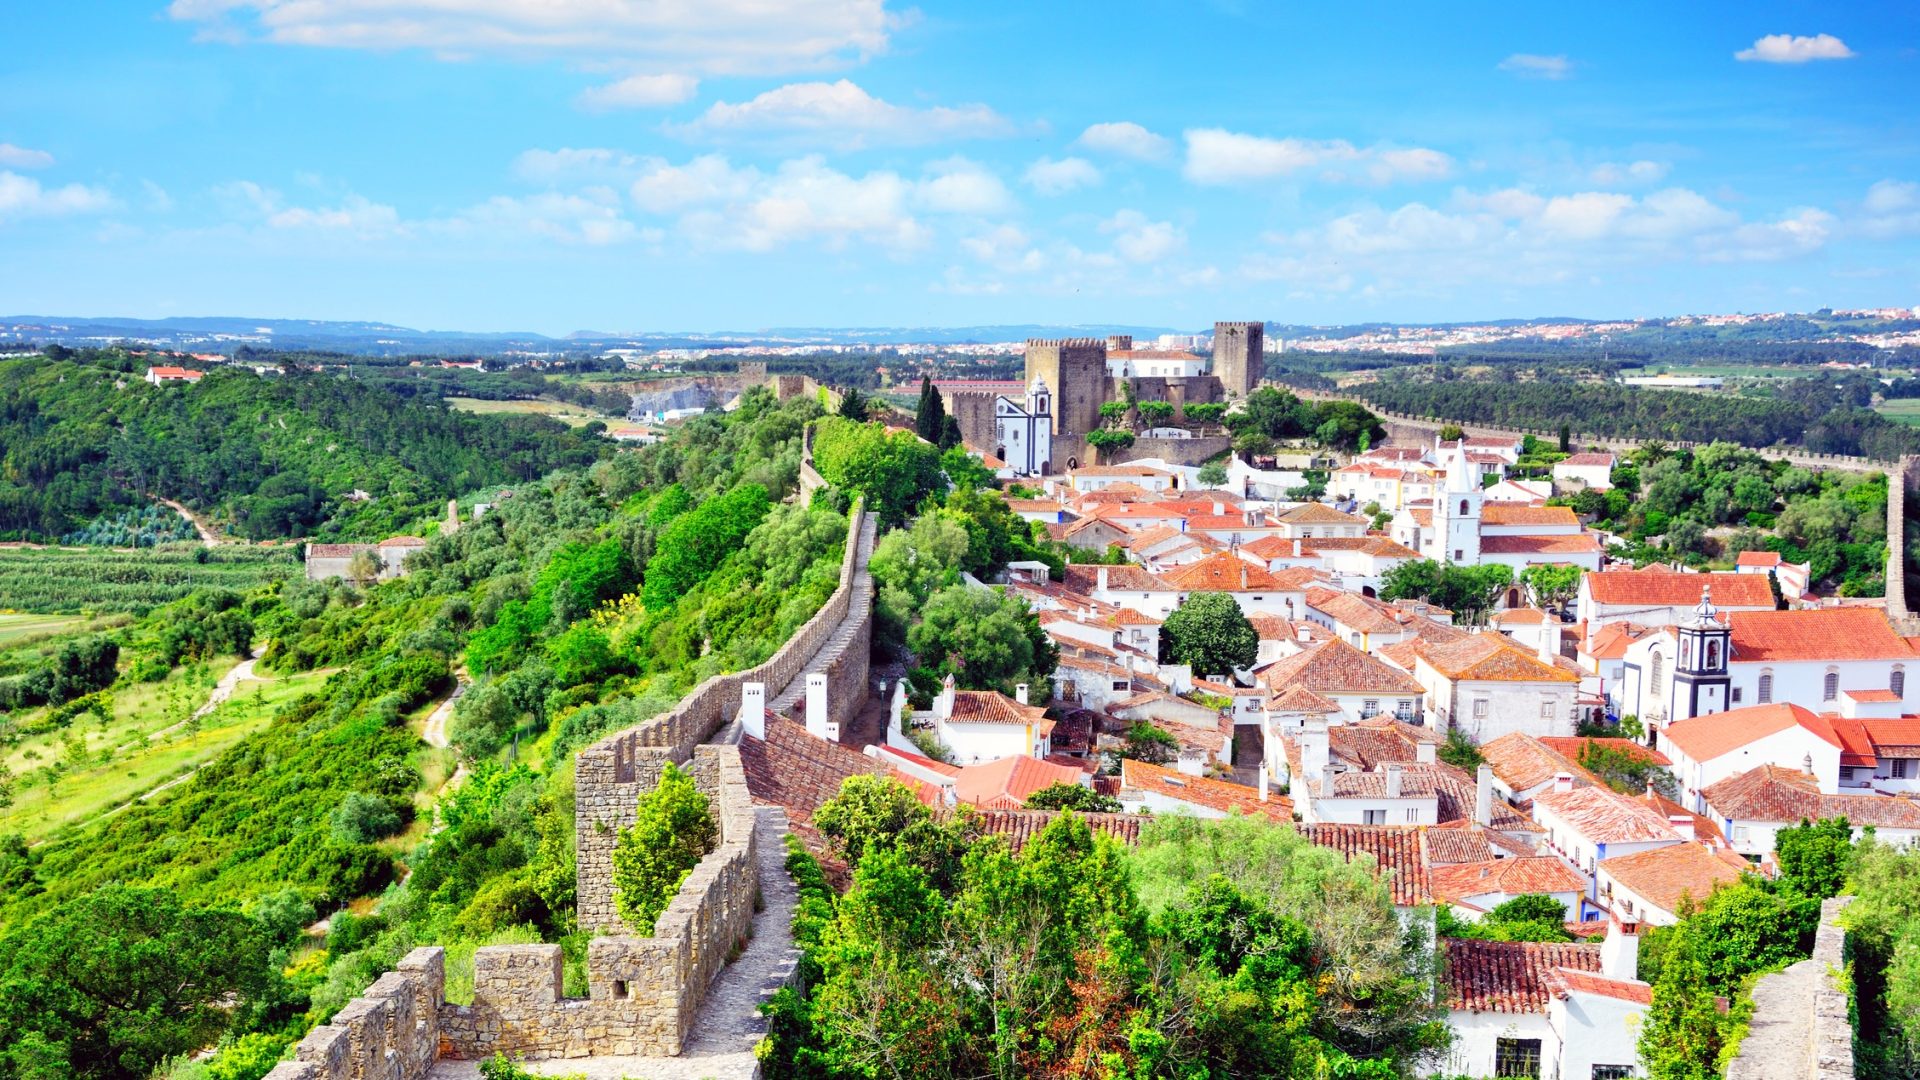 <ul> <li><strong>Average home price:</strong> $747,000</li> </ul> <p>The name of this charming historic town comes from the Latin <em>oppidum</em>, which literally means "walled city." With its medieval castle looming majestically over this quiet and almost overlooked treasure, Obidos is one of Europe's best medieval walled towns, and it's still home to about 2,000 permanent inhabitants. </p> <p>Its labyrinth of narrow, cobbled streets lined with traditional whitewashed houses is only about 50 miles north of Portugal's capital city, making it a popular day trip for tourists staying in Lisbon.</p>